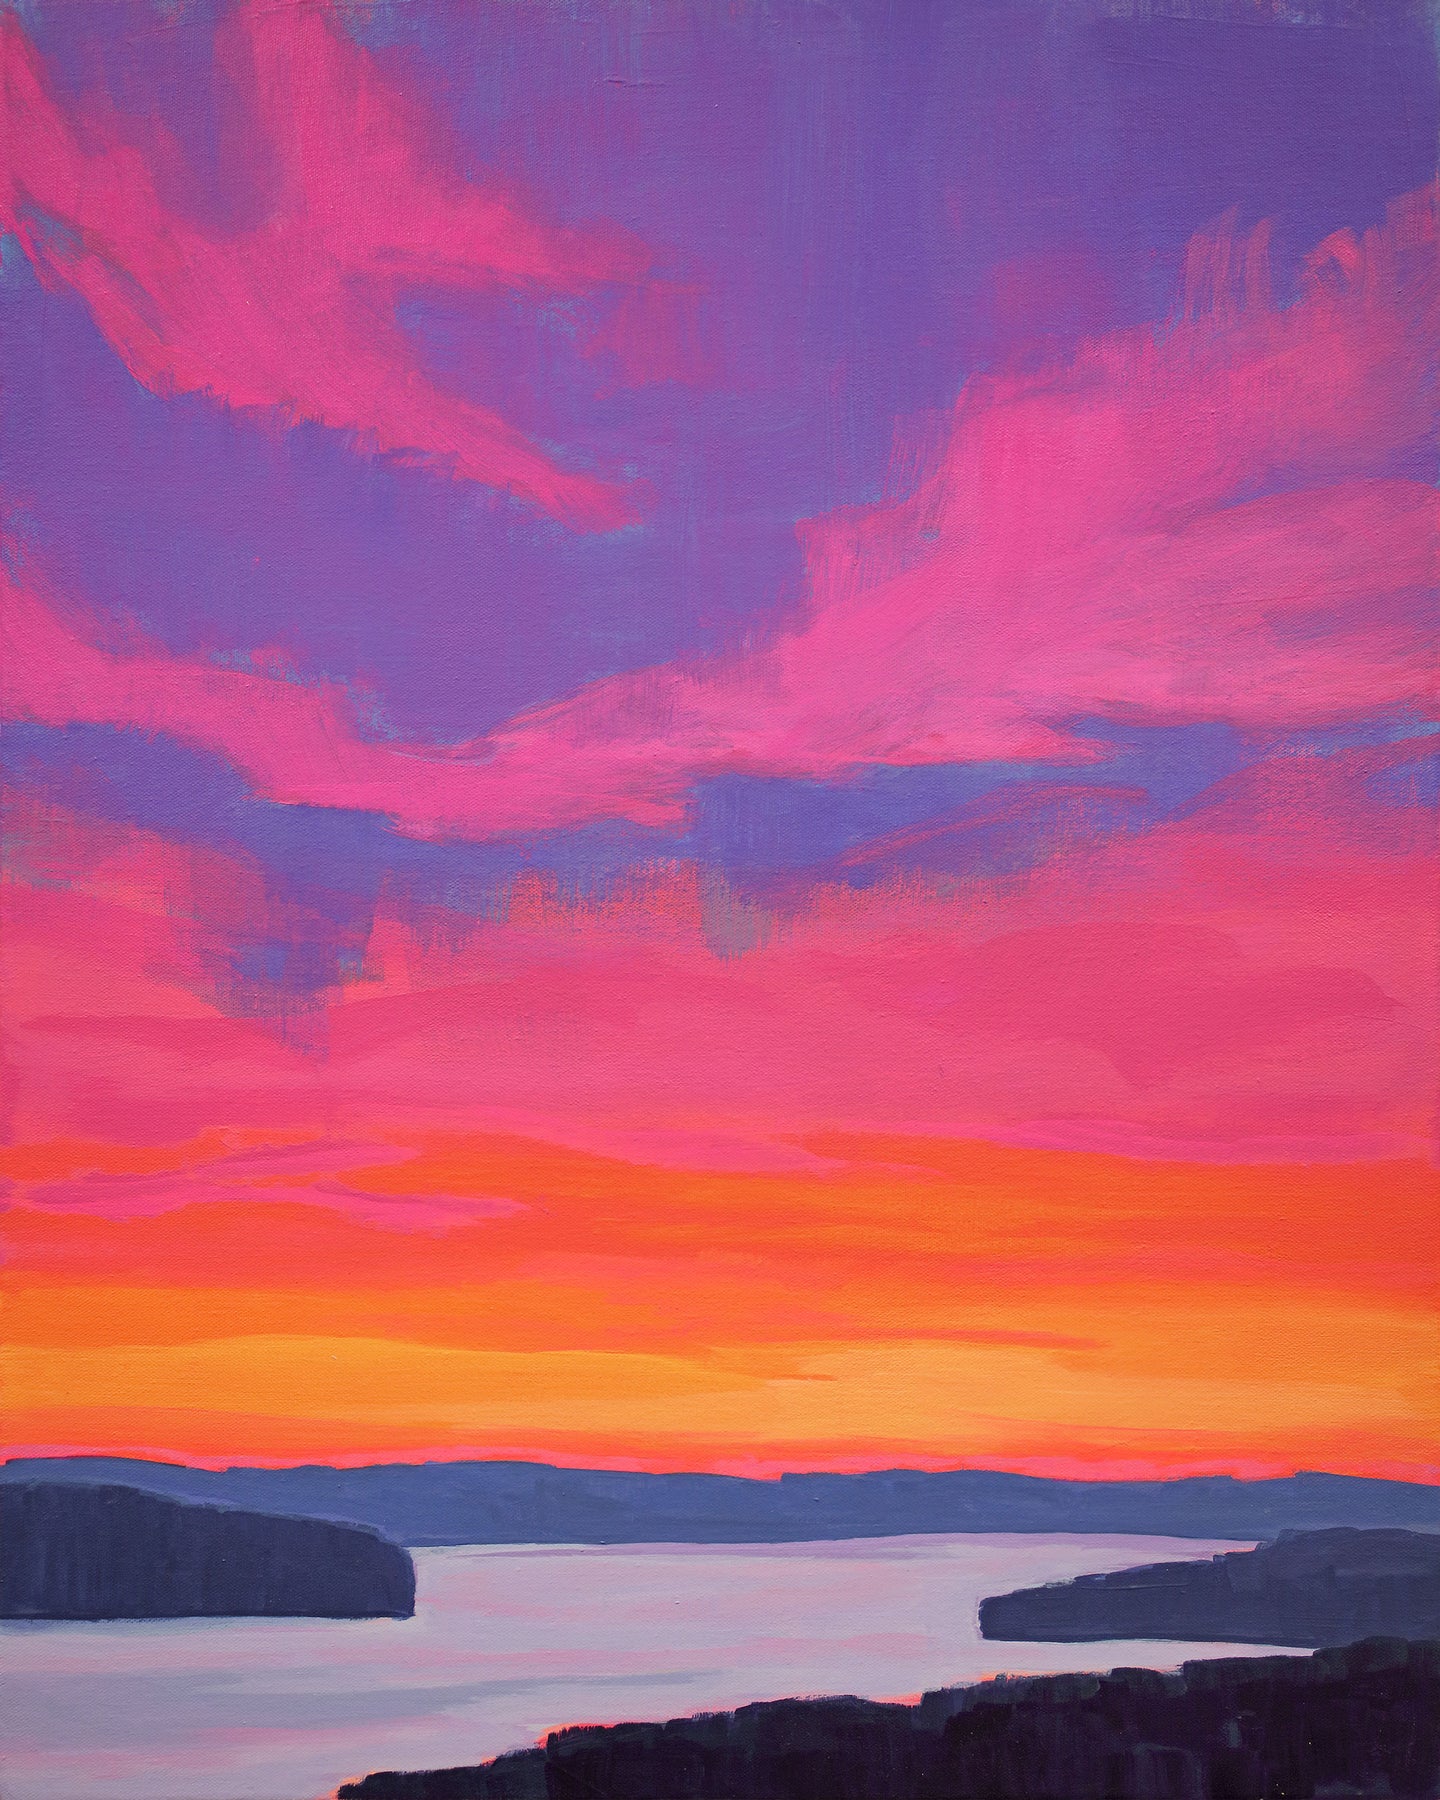 Pink Sunset Art Print, Acrylic Painting, Abstract Print, Landscape